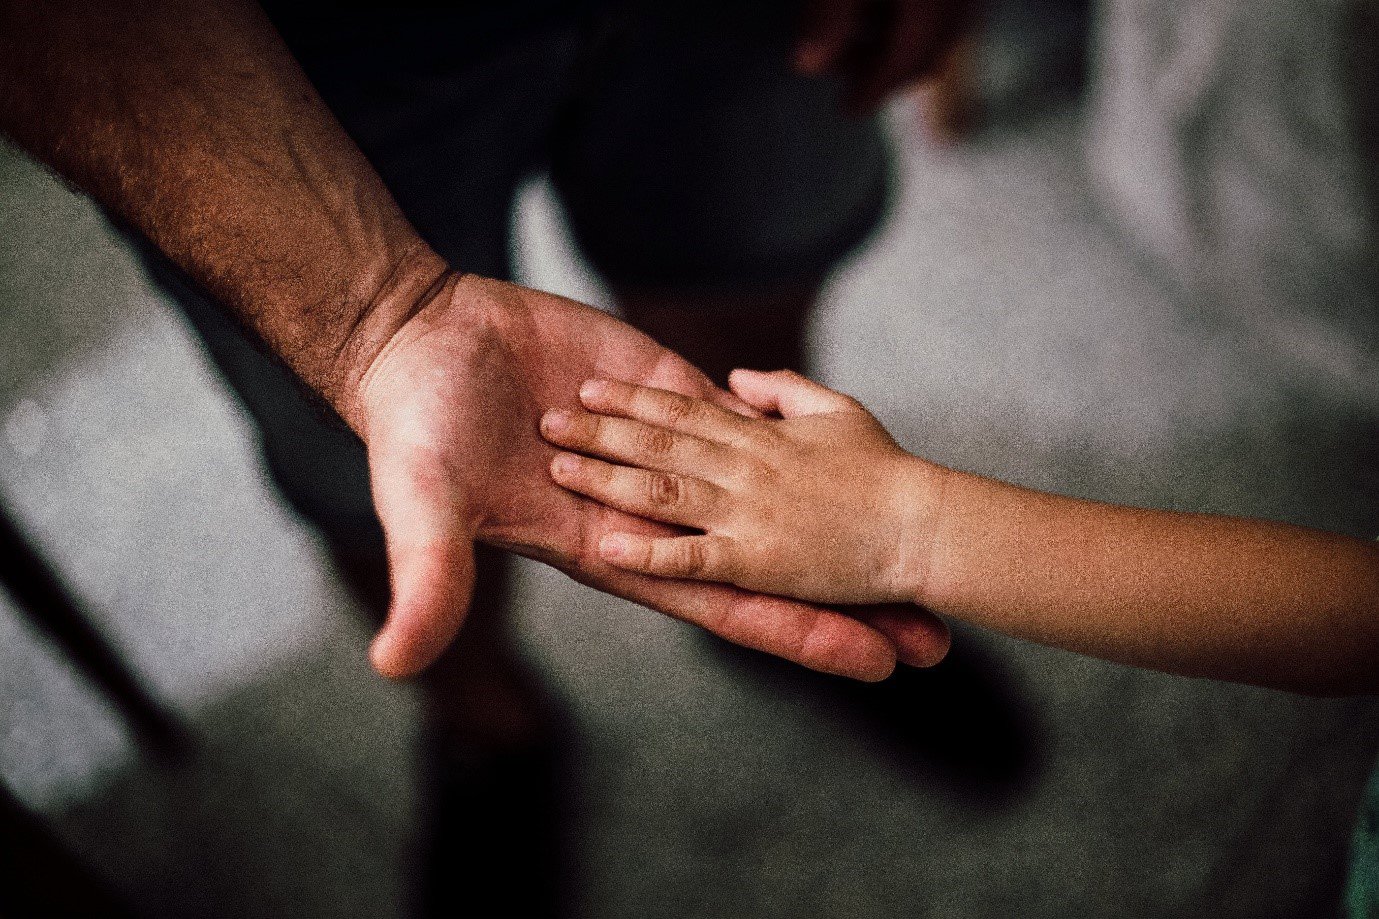 a child placing their hand into an adult's hand